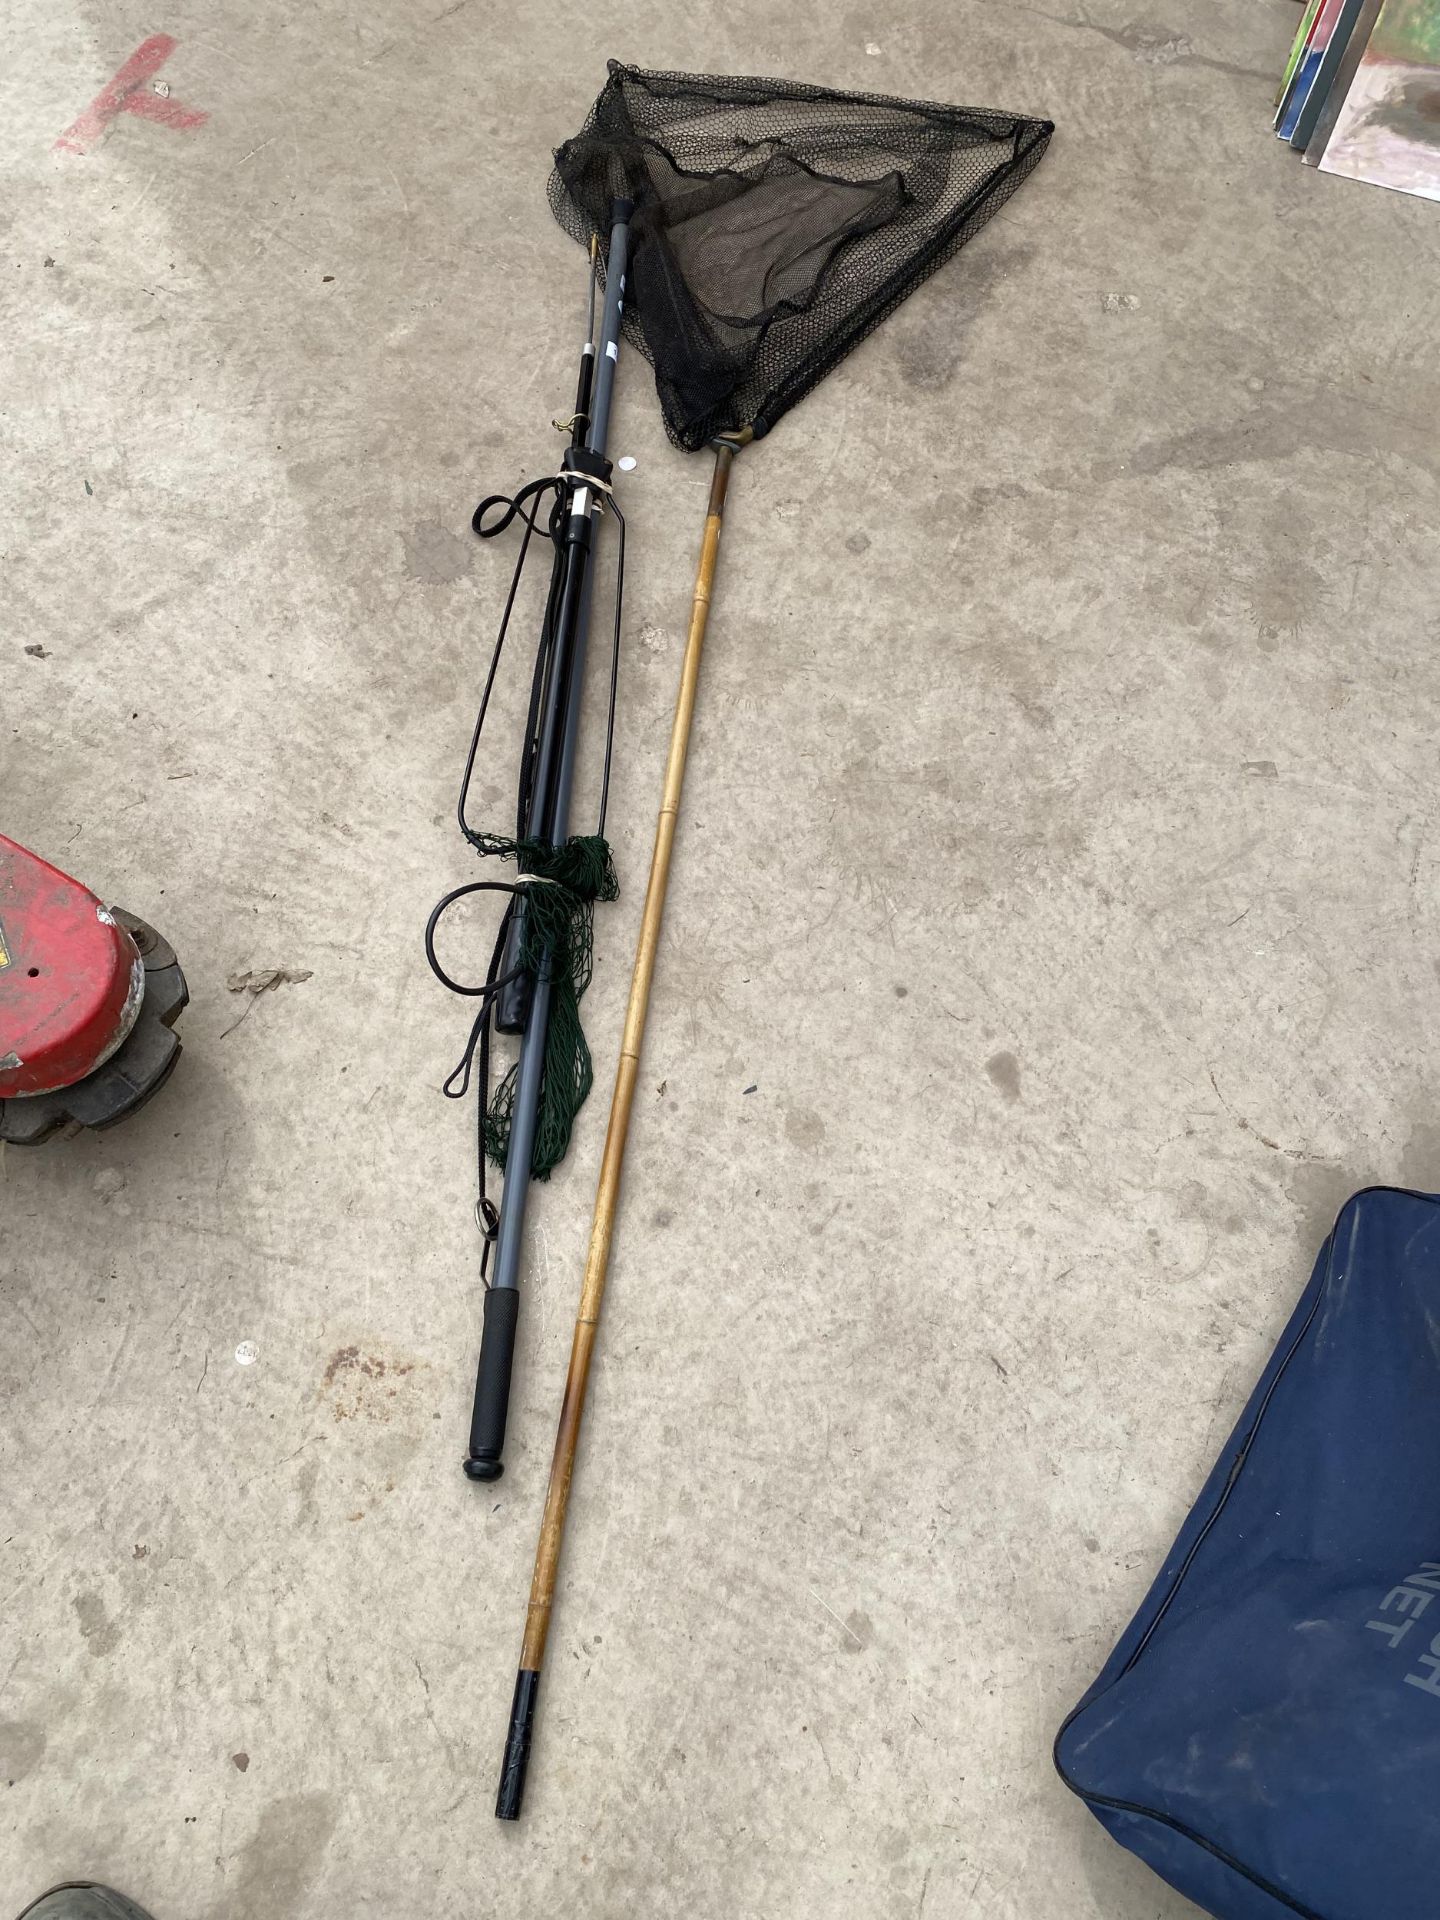 A CANE HANDLED FISHING NET, A WADING STAFF AUTOMATIC LANDING NET AND A SHARPES OF ABERDEEN SALMON